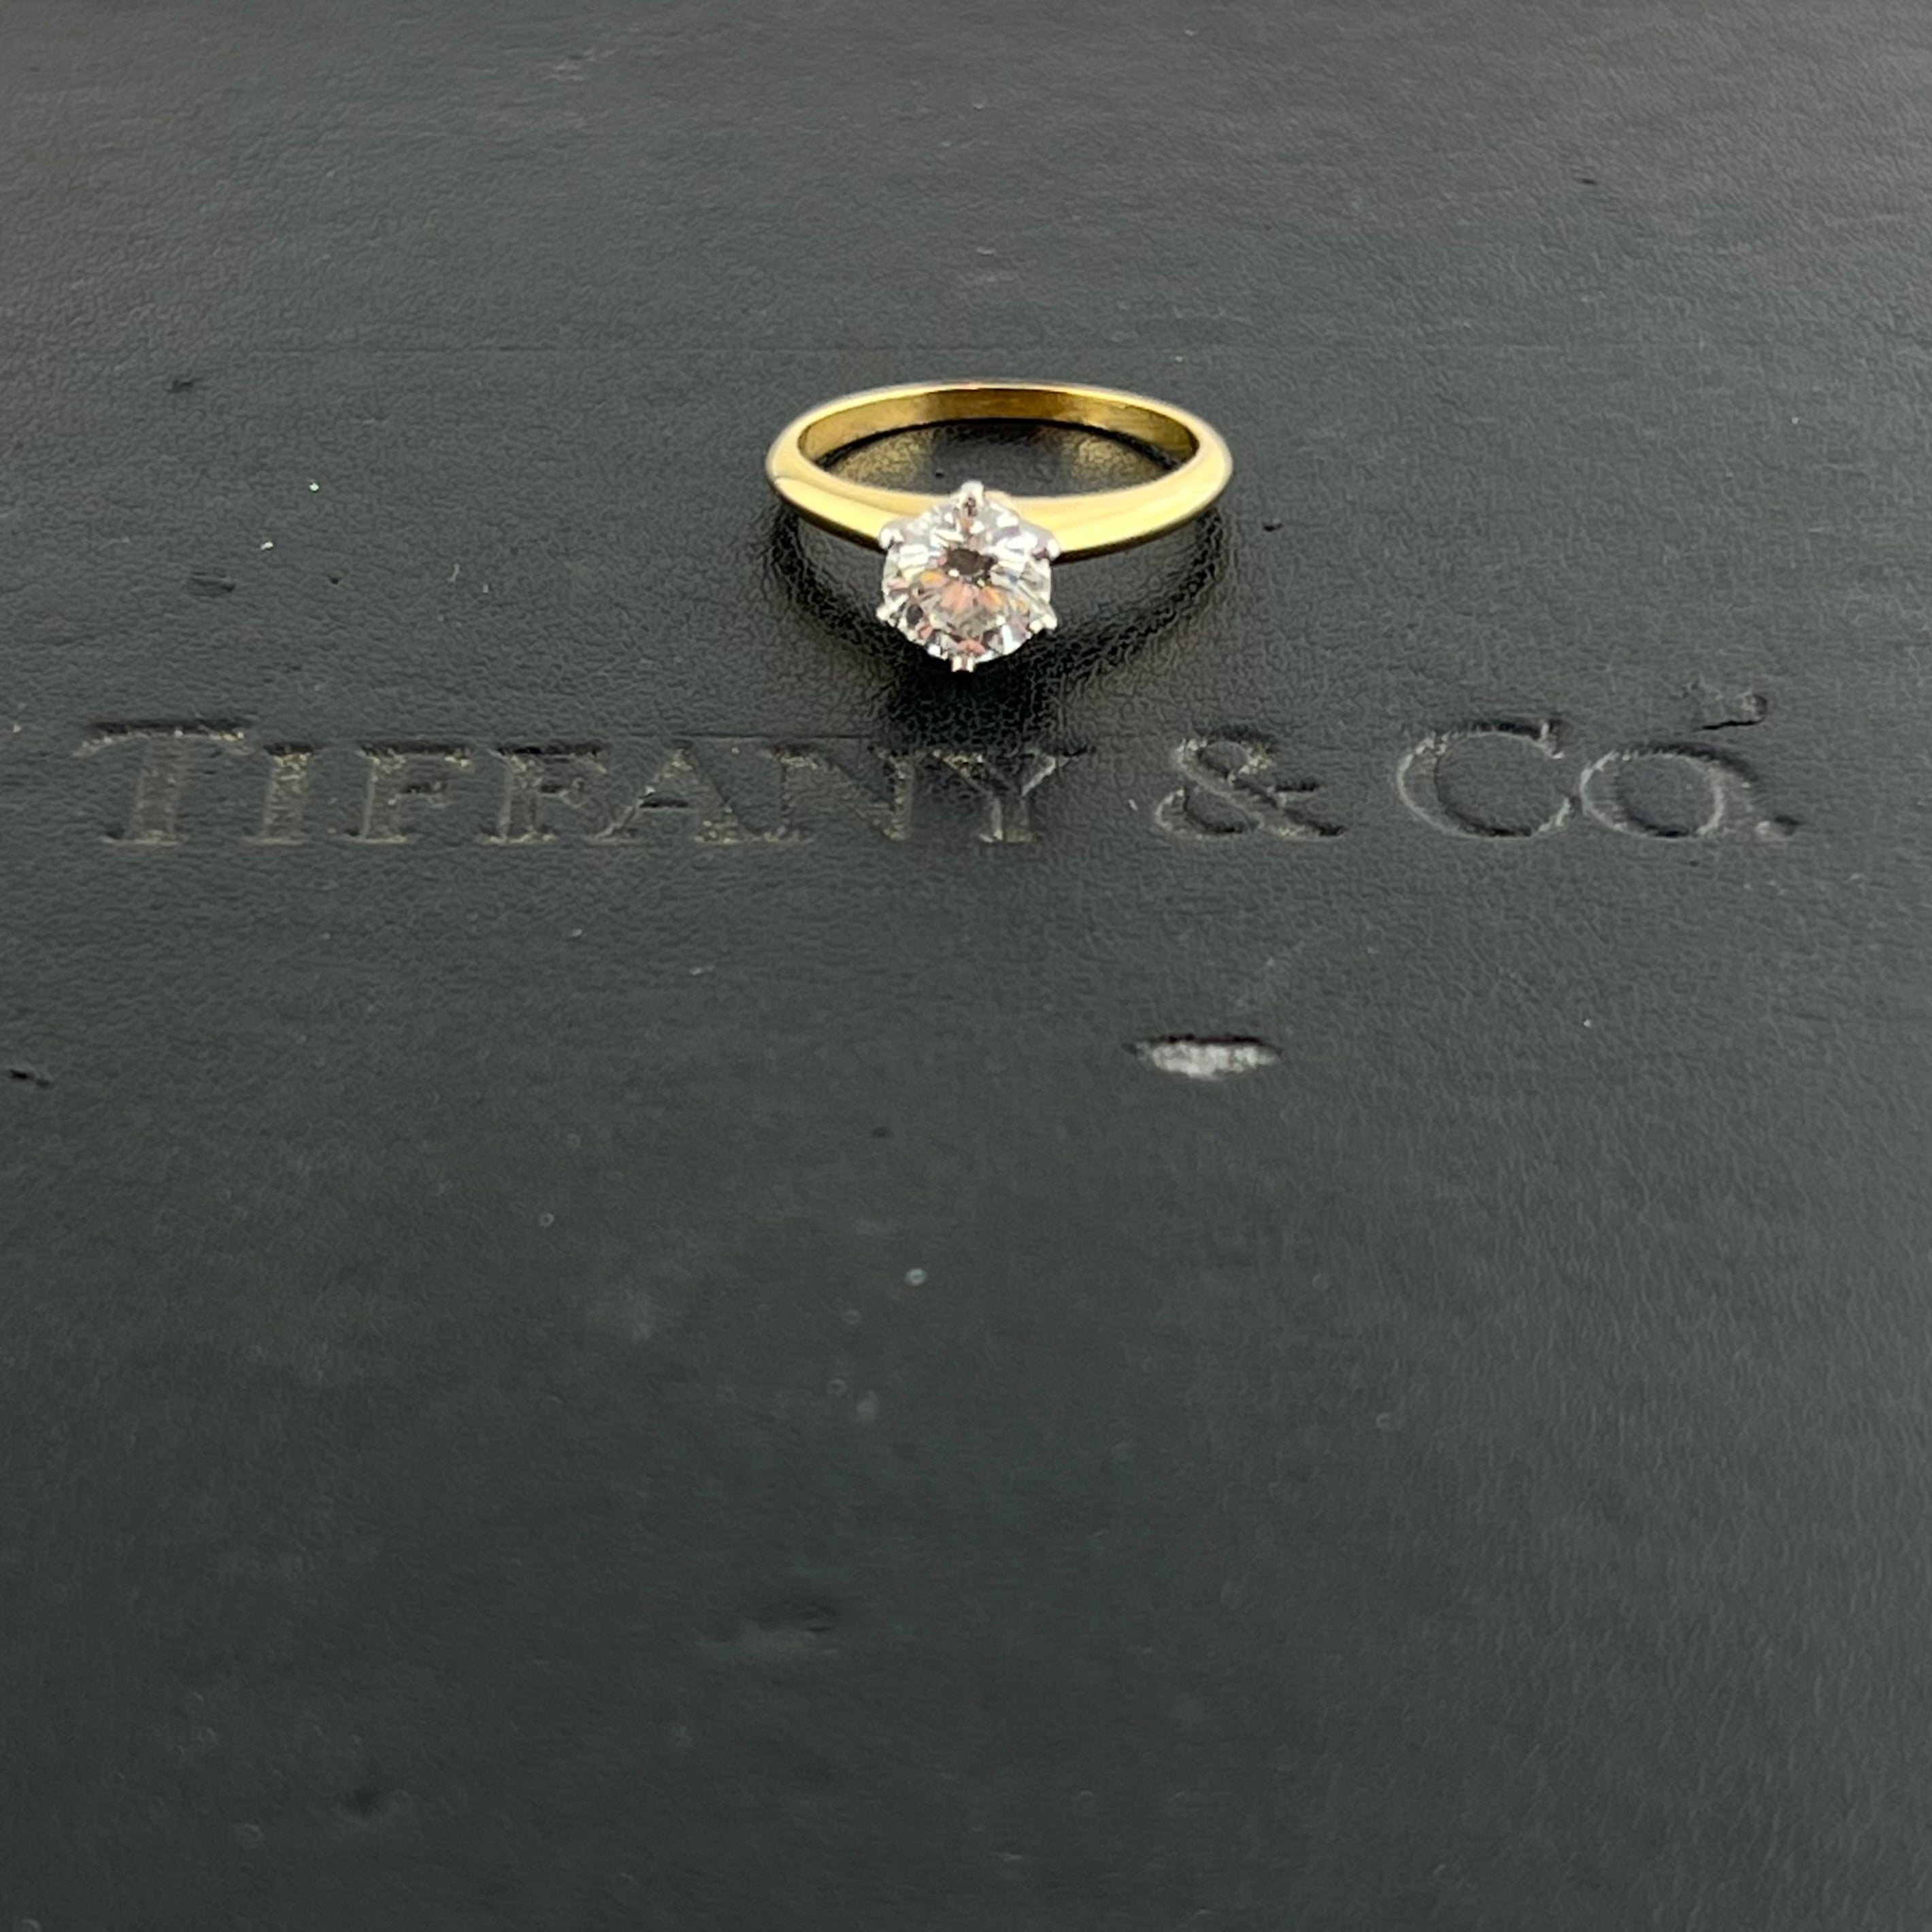 T&CO.® band ring with diamonds in platinum, 3mm wide. | Tiffany & Co.